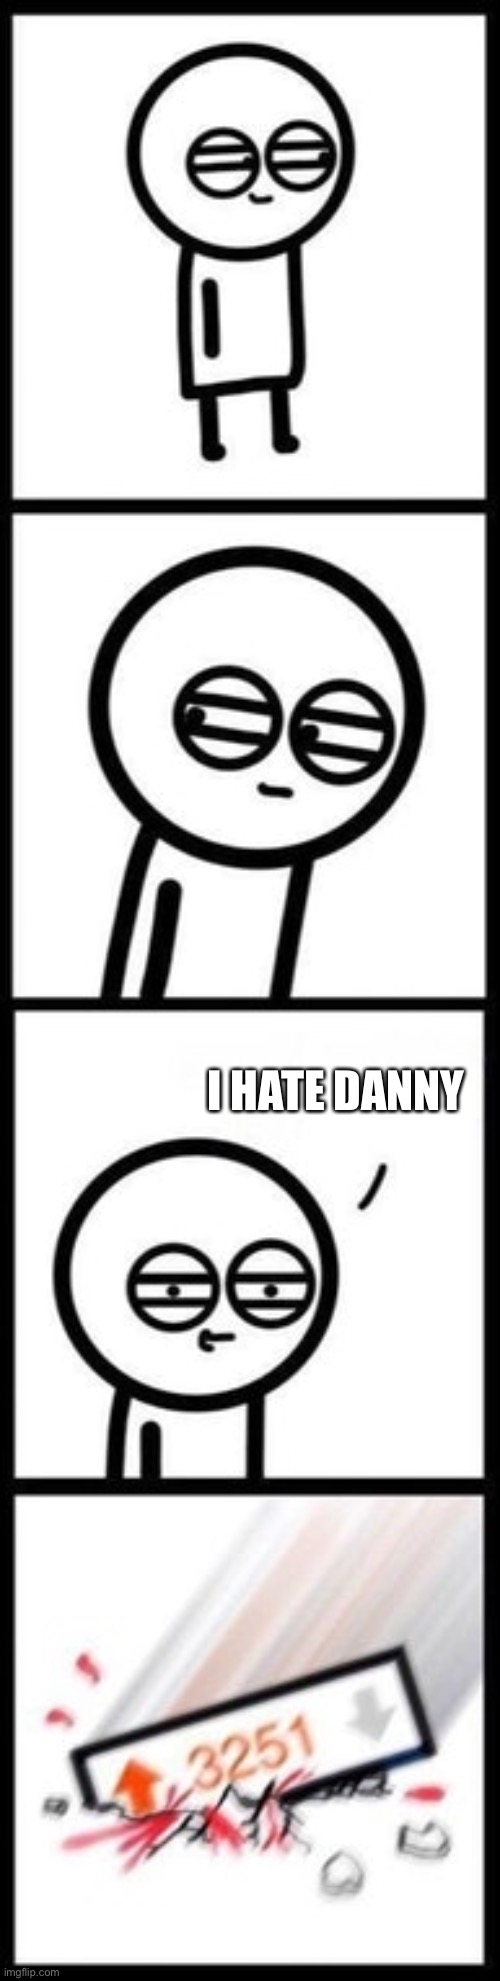 3251 upvotes | I HATE DANNY | image tagged in 3251 upvotes | made w/ Imgflip meme maker